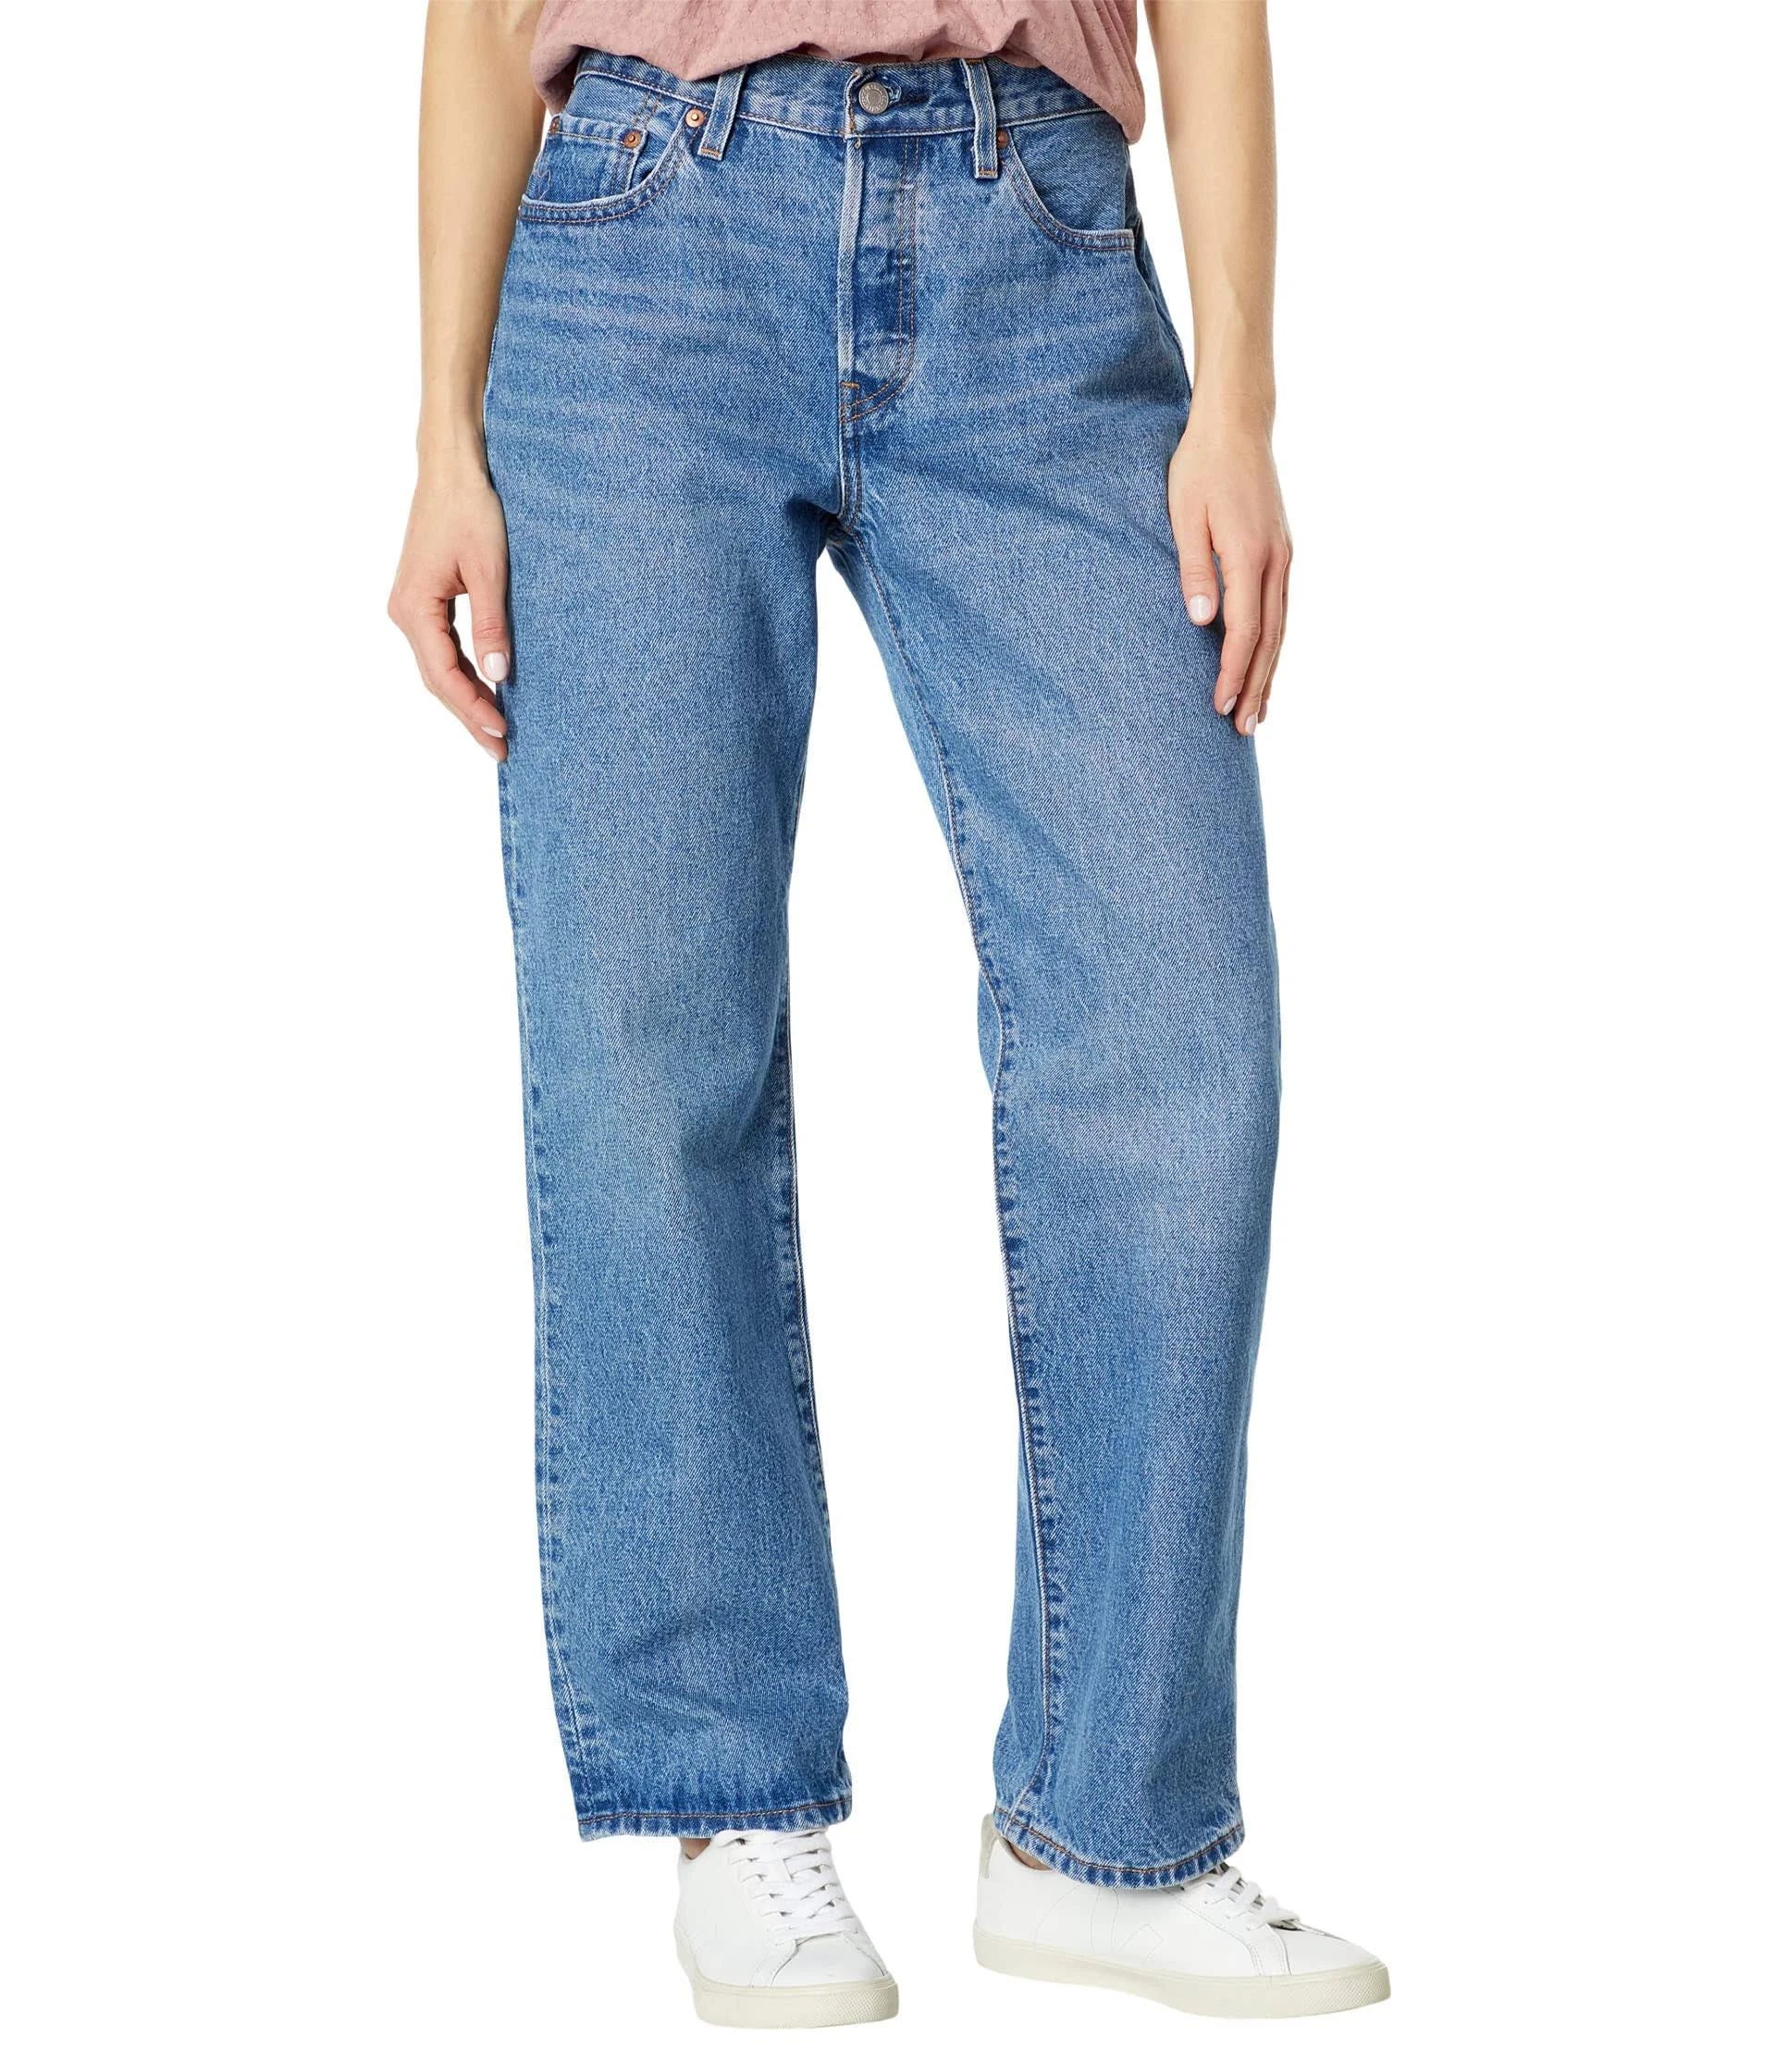 Loose-Fit 90s Levi's Women's Jeans: Comfort and Style Combined | Image